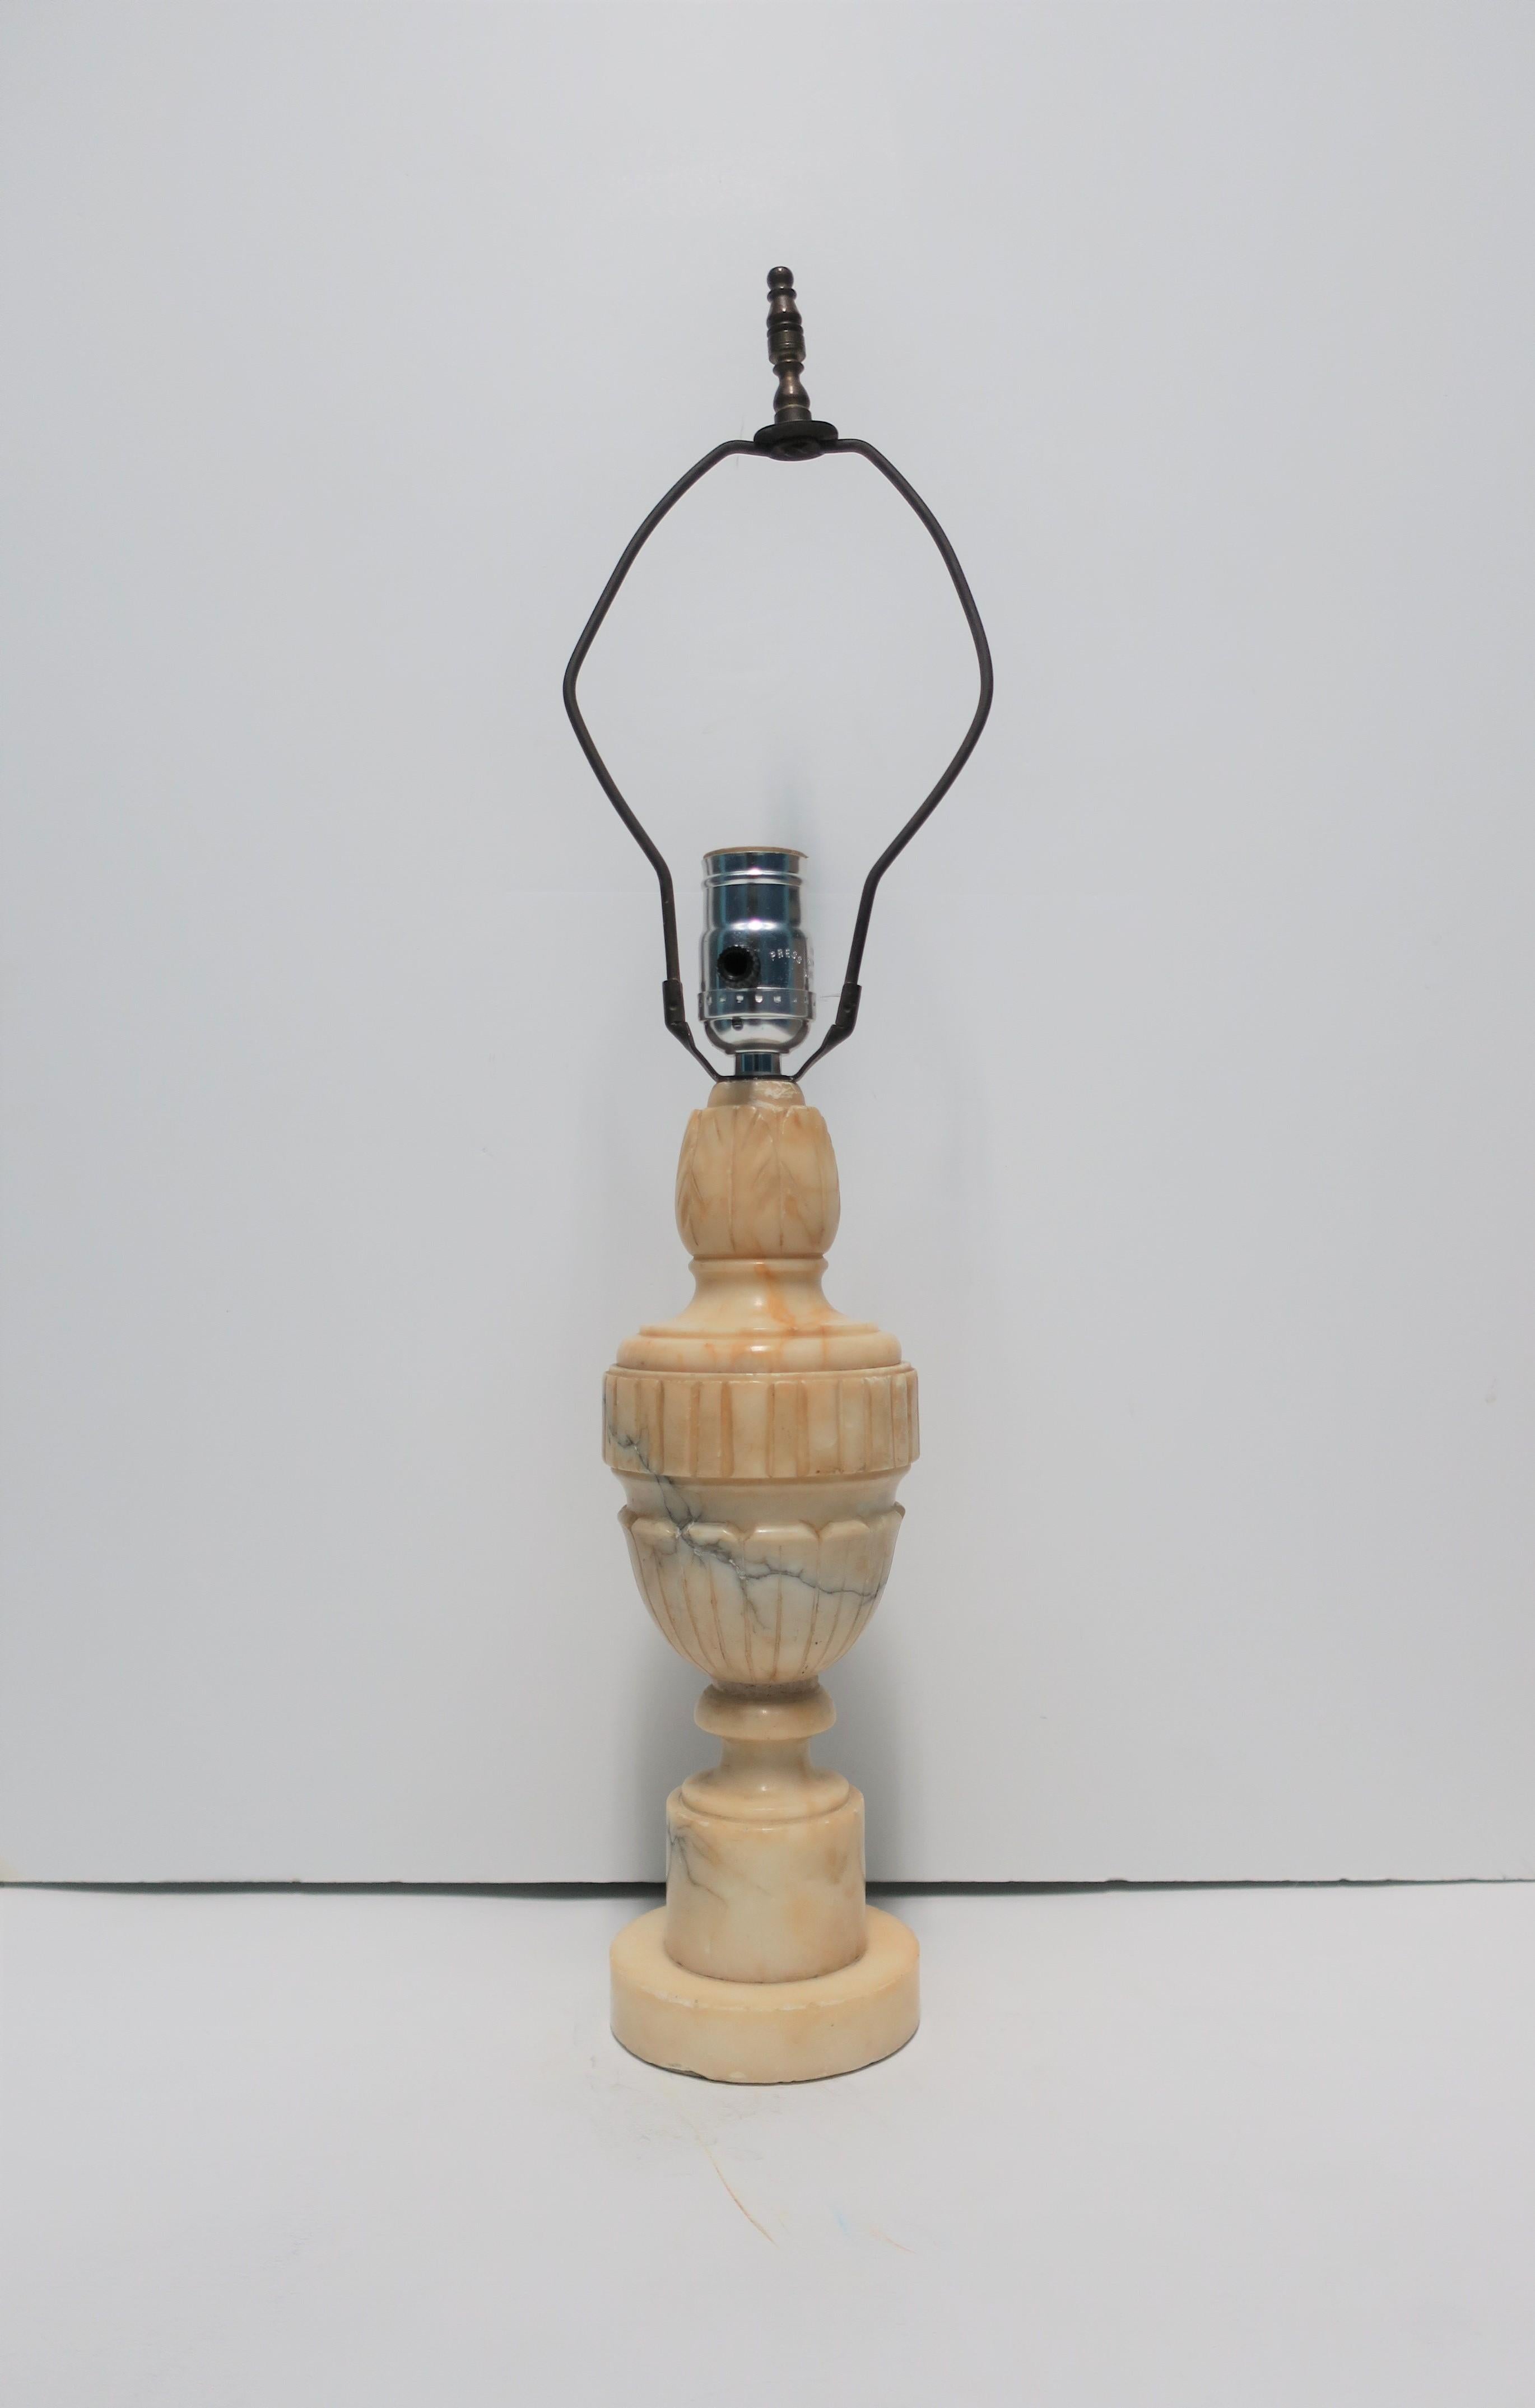 A beautiful, relatively small, Neoclassical style Italian alabaster marble 'Urn' form desk or table lamp, circa early 20th century, Italy. Alabaster marble is a cream and butter hue with dark grey veining. Lamp has beautiful carved details at top